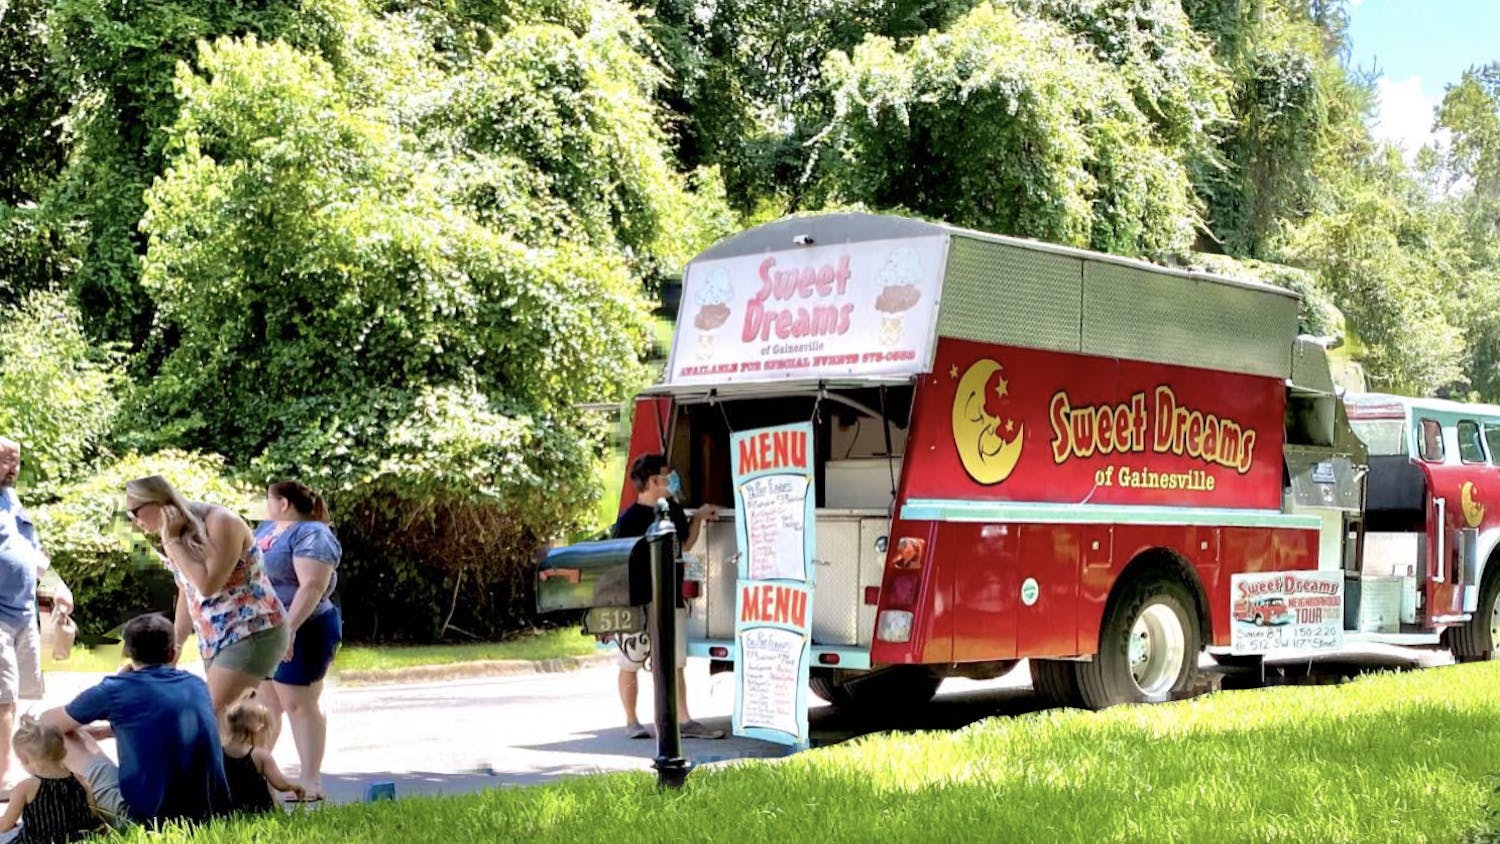 Starting last month, Sweet Dreams began its neighborhood ice cream truck tours in hopes of spreading the word about fully reopening again. (Courtesy to The Alligator)